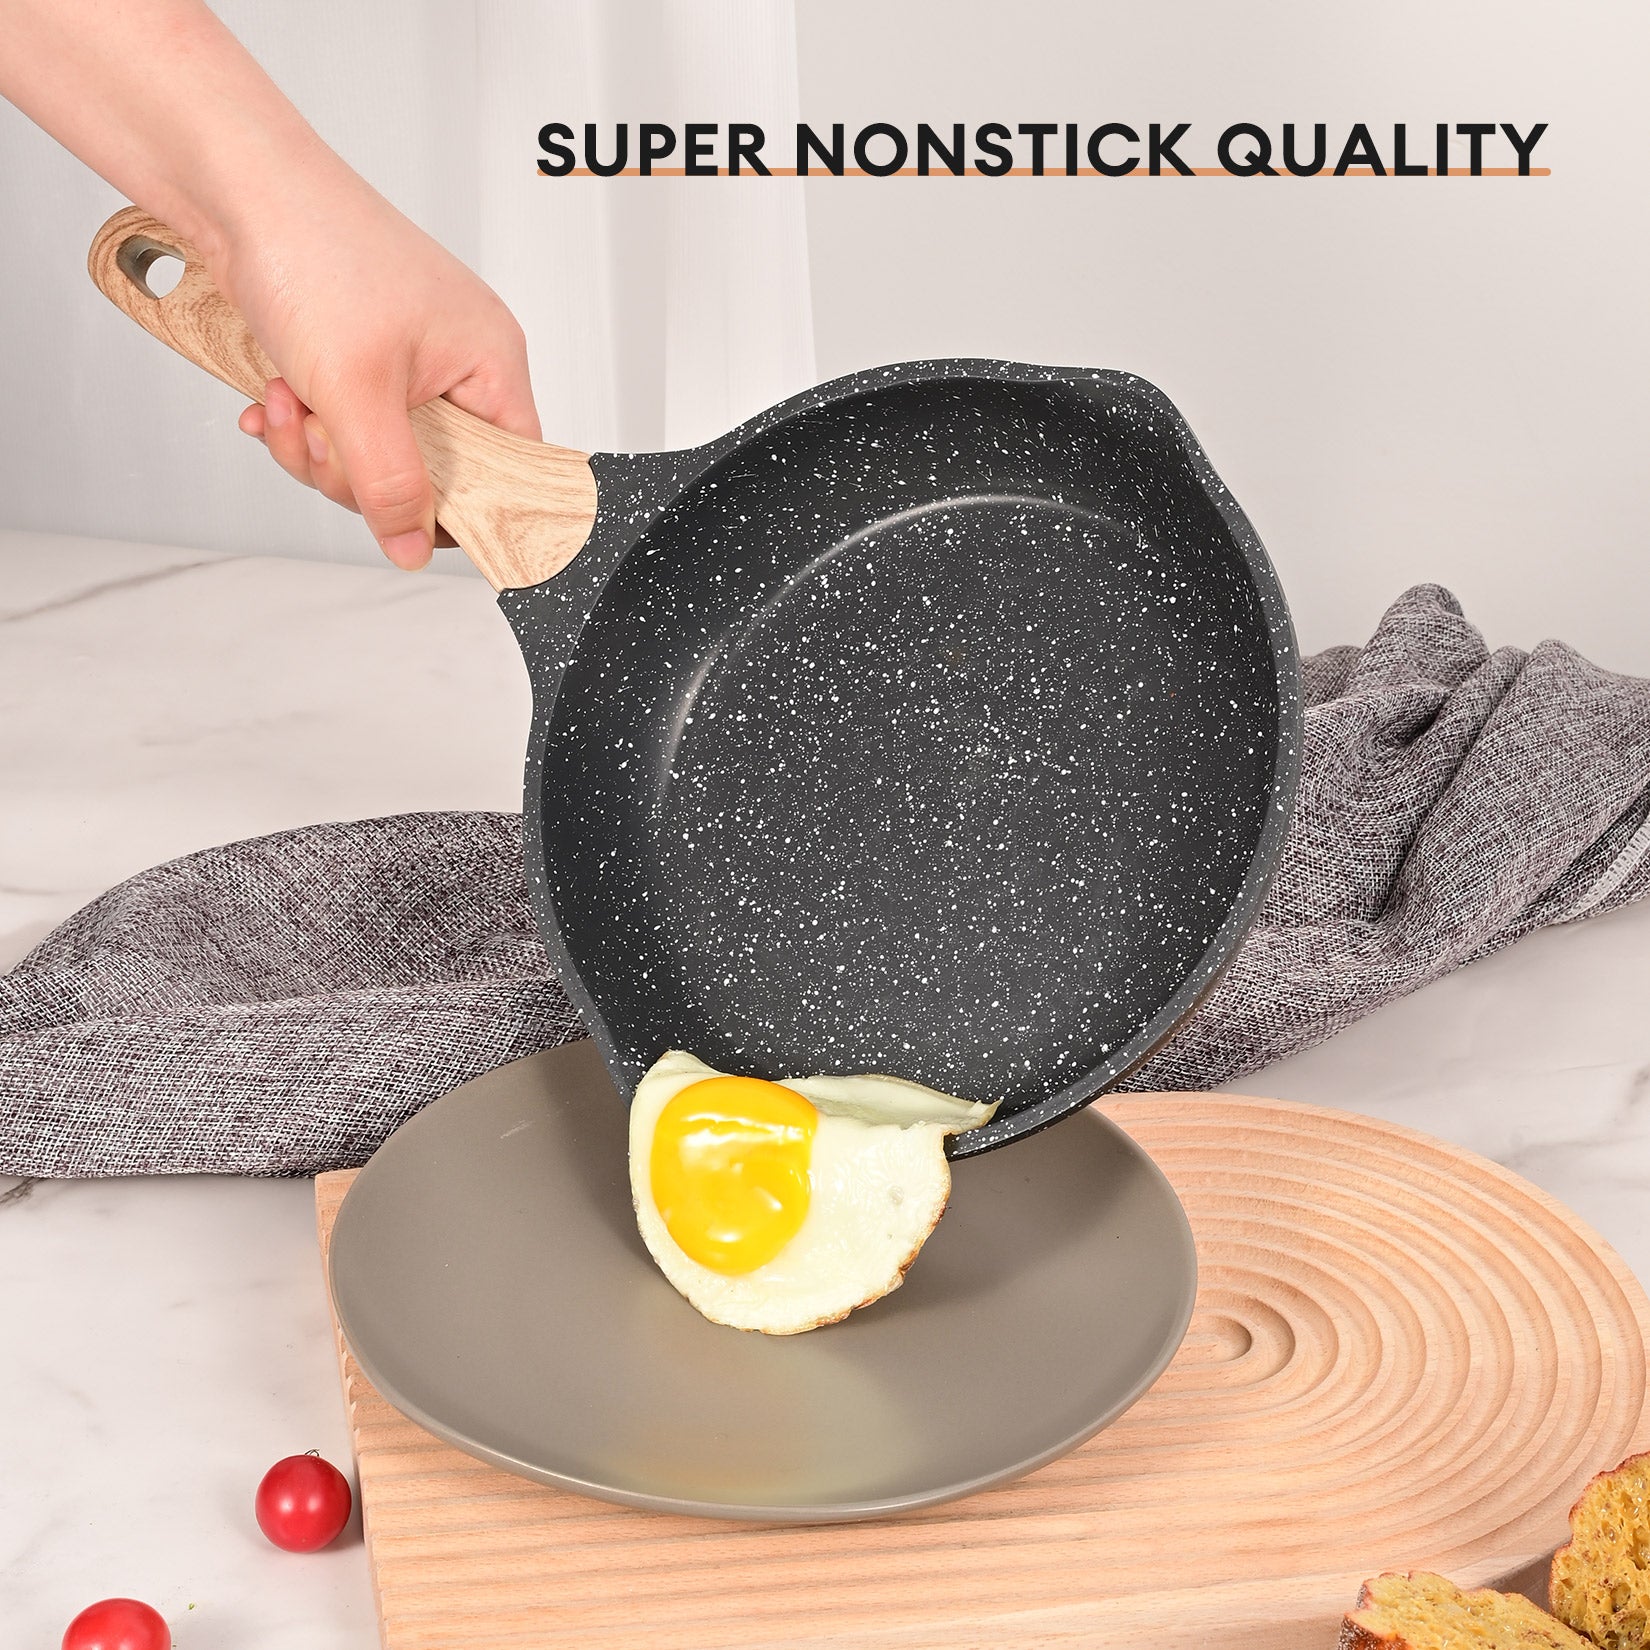 JEETEE 8 Inch Nonstick Frying Pan, Stone Coating Cookware, Nonstick  Omelette Pan with Heat-Resistant Handle, Induction Skillet for Eggs (Grey)